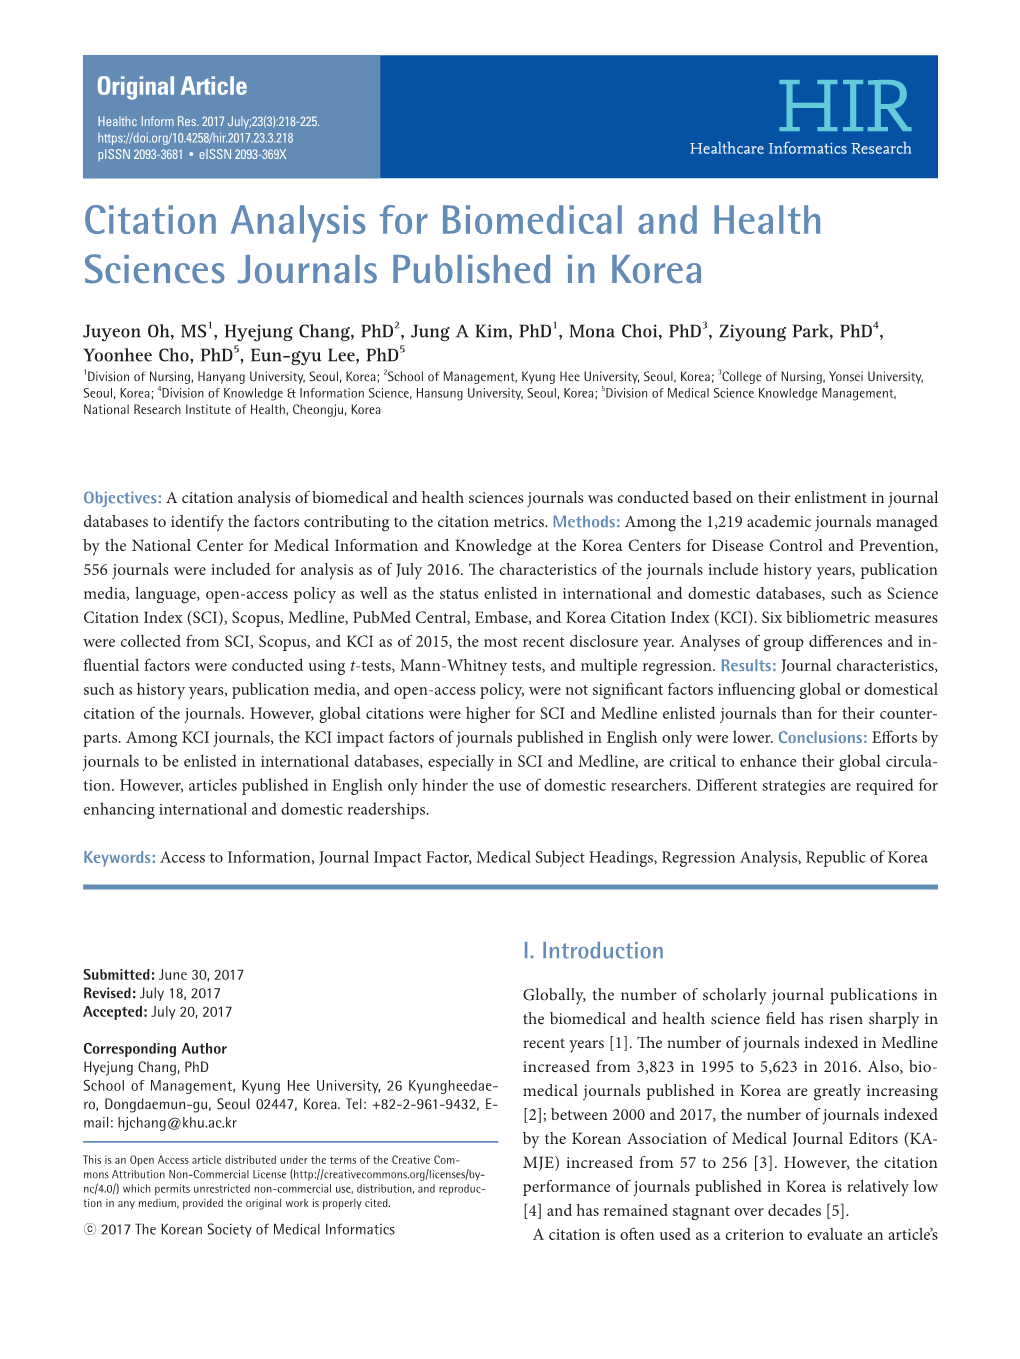 Citation Analysis for Biomedical and Health Sciences Journals Published in Korea